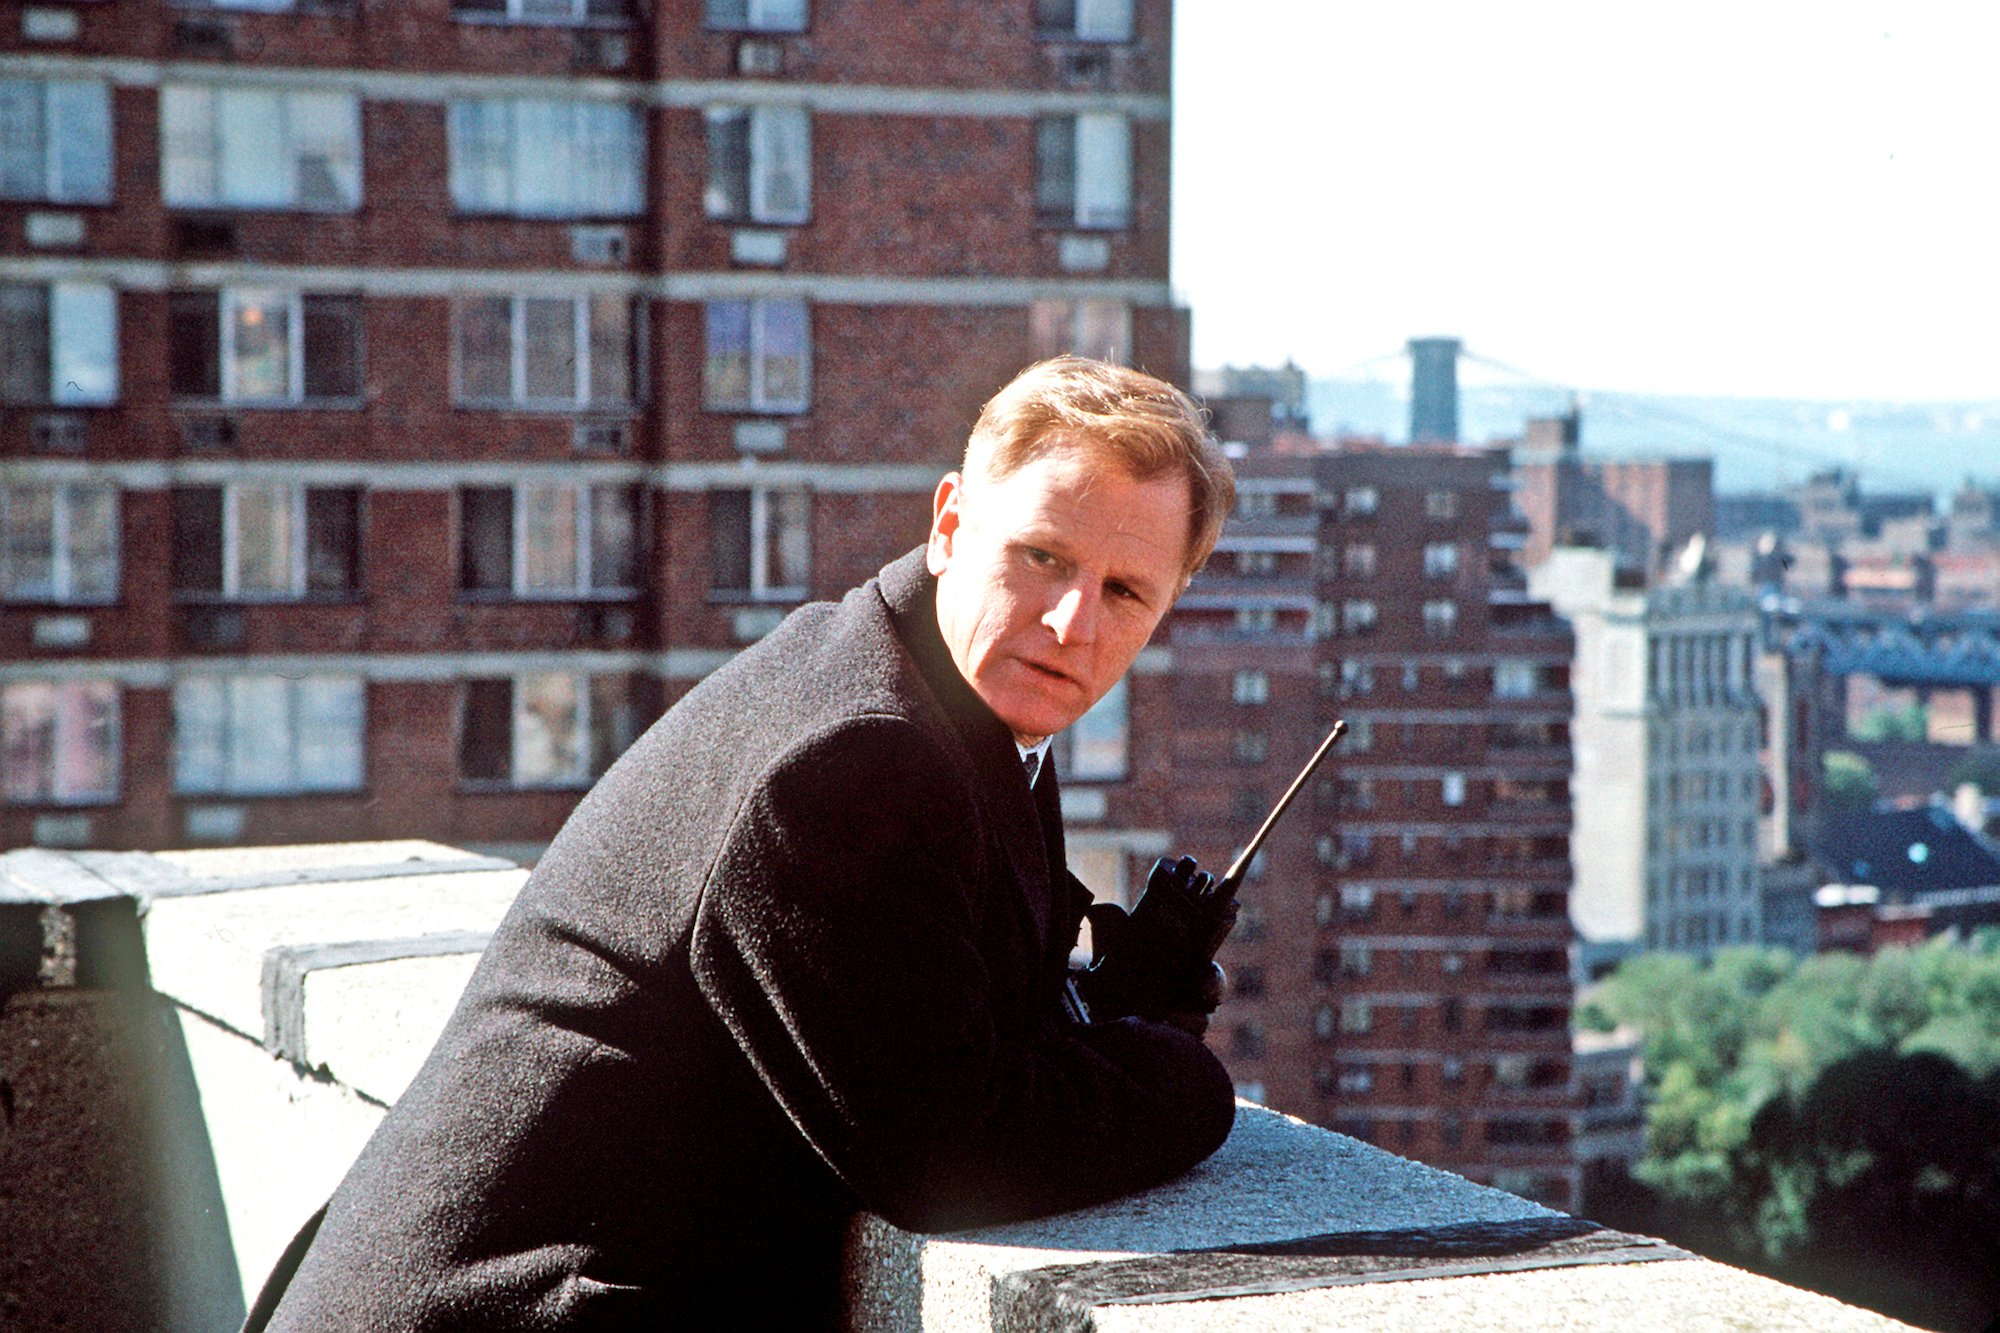 Gordon Clapp on NYPD Blue, leaning on the edge of a building in front of a cityscape